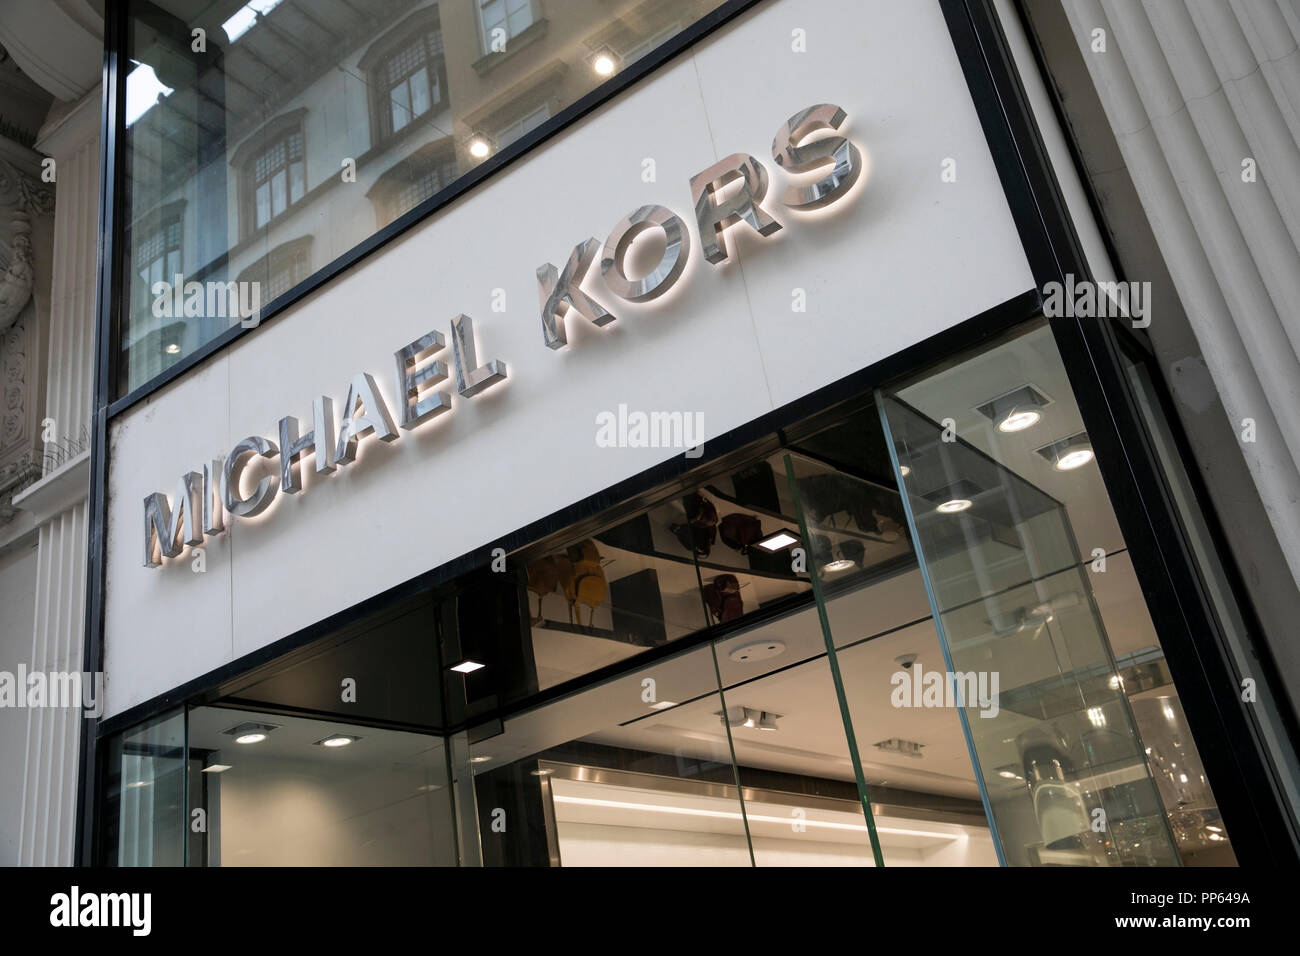 Michael kors sign hi-res stock photography and images - Alamy